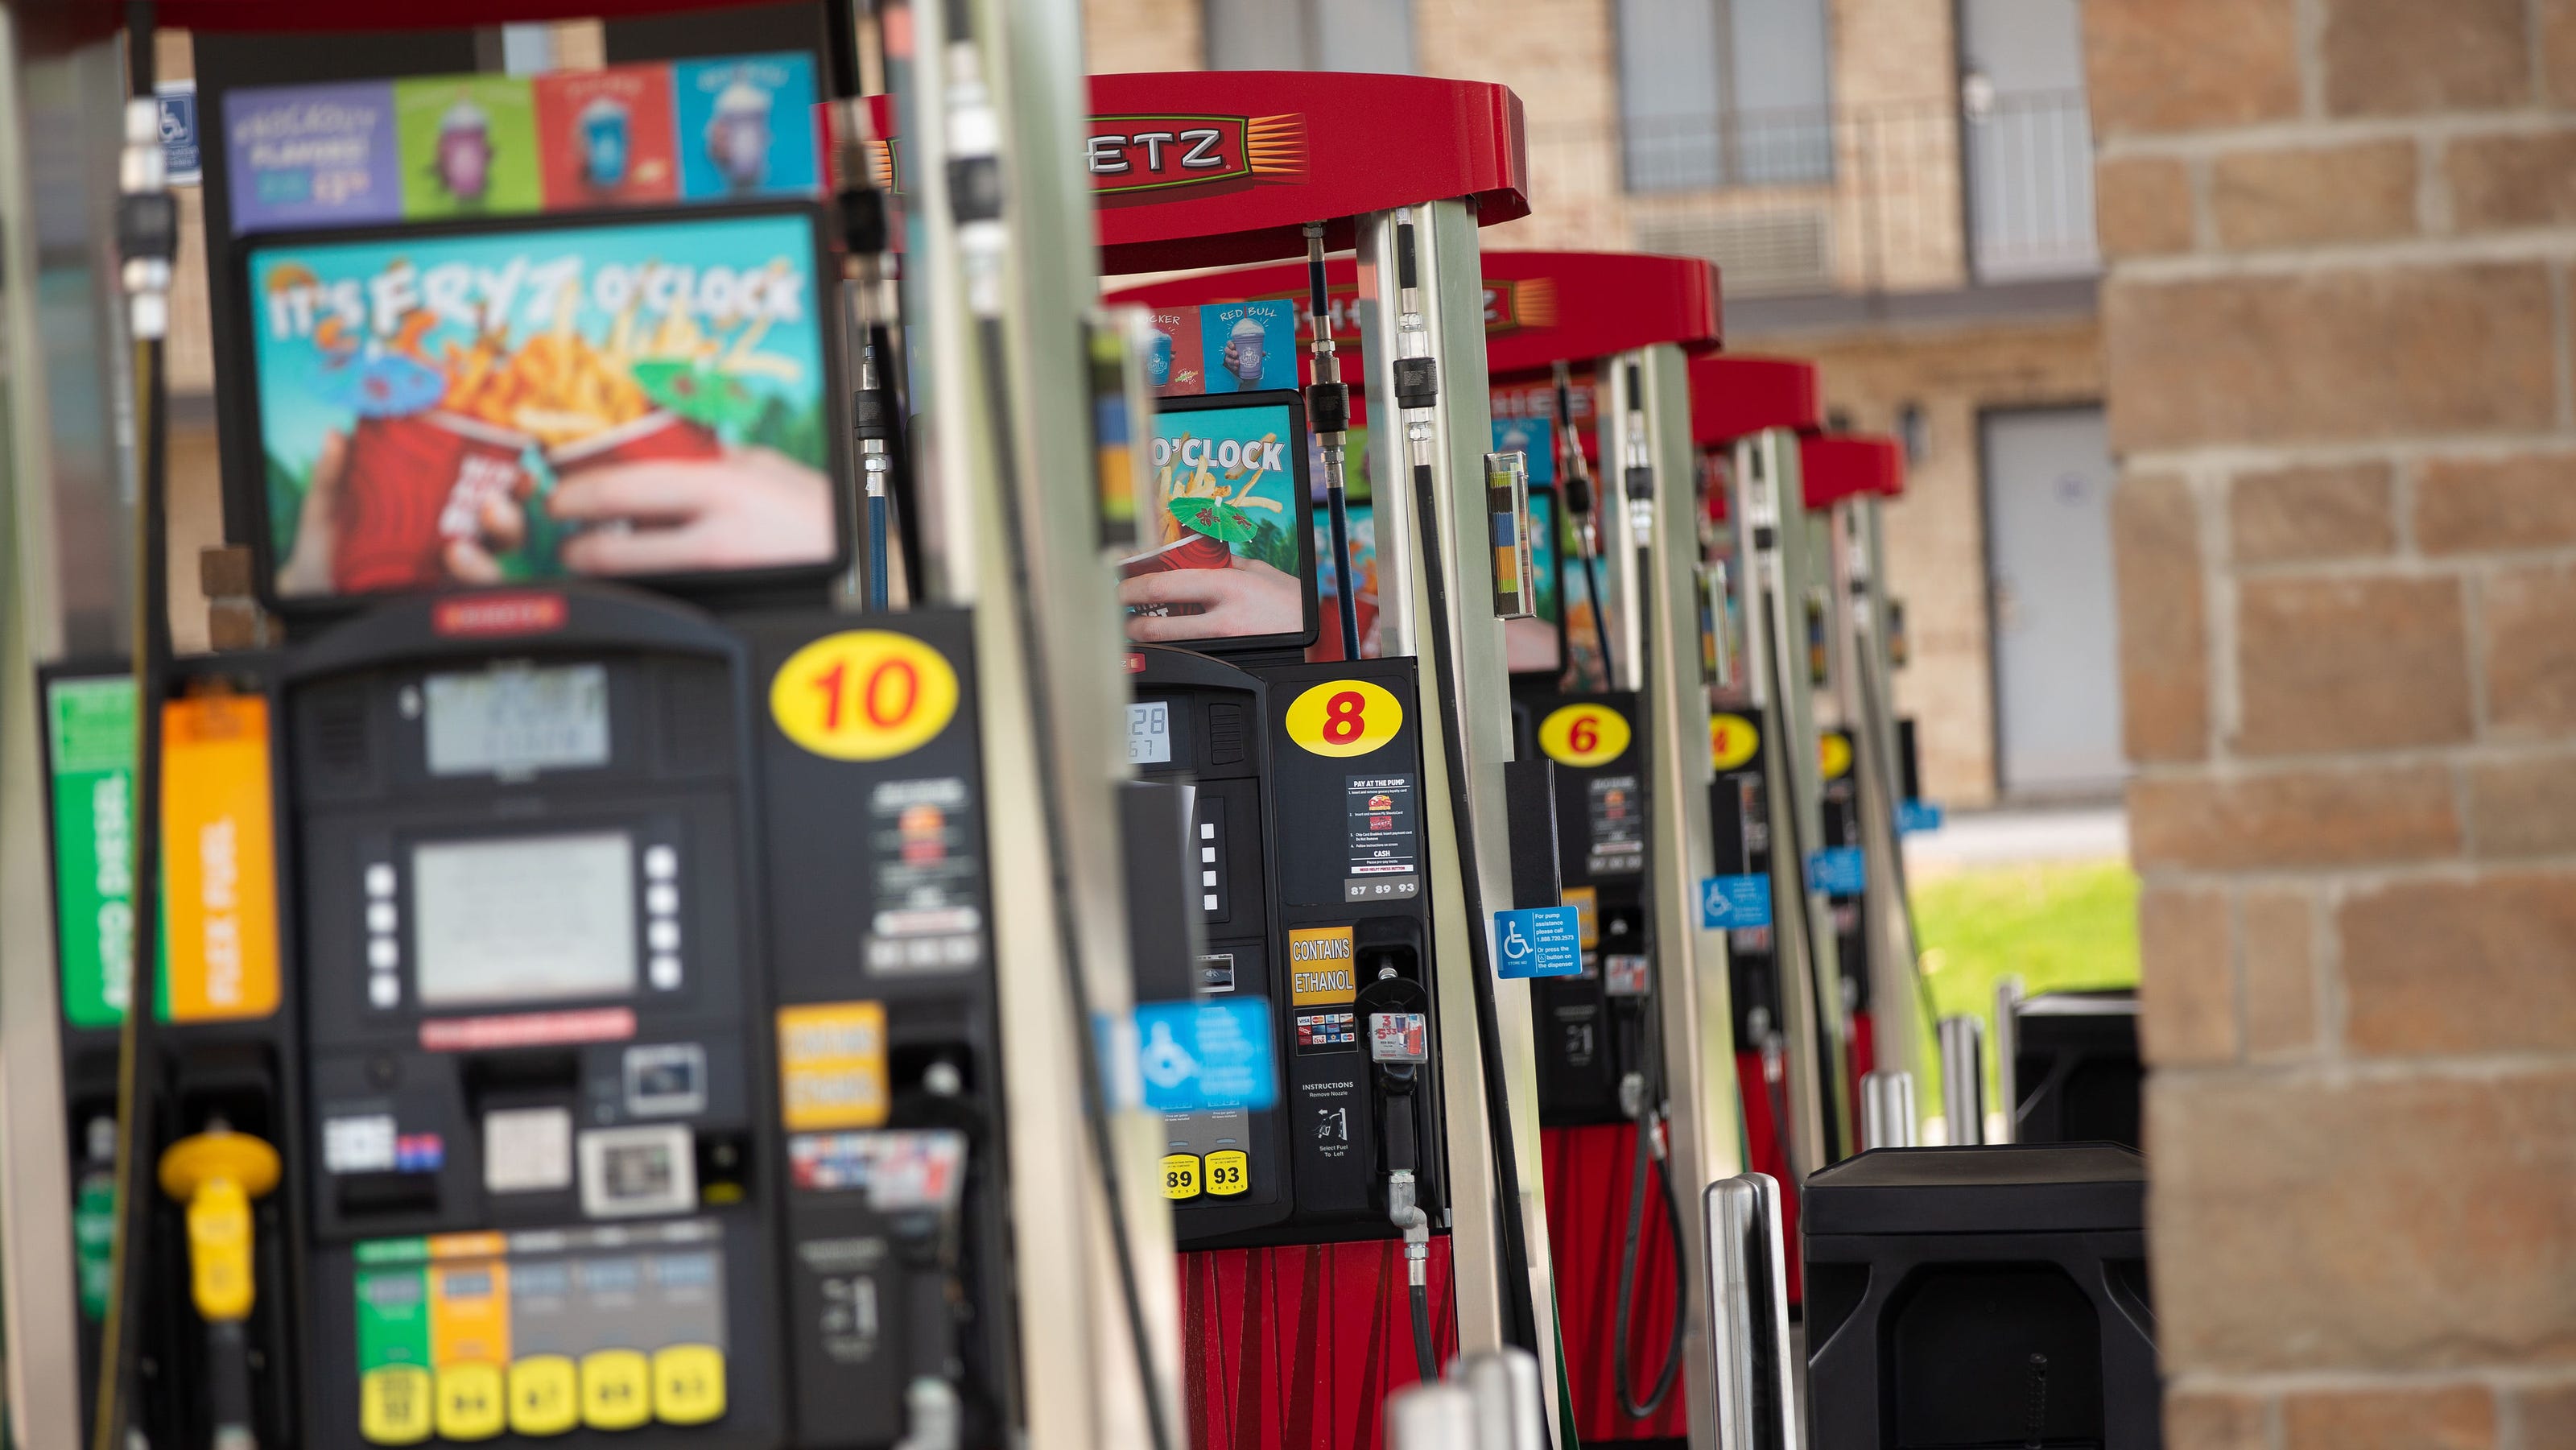 Sheetz lowers diesel fuel prices by 50 cents a gallon